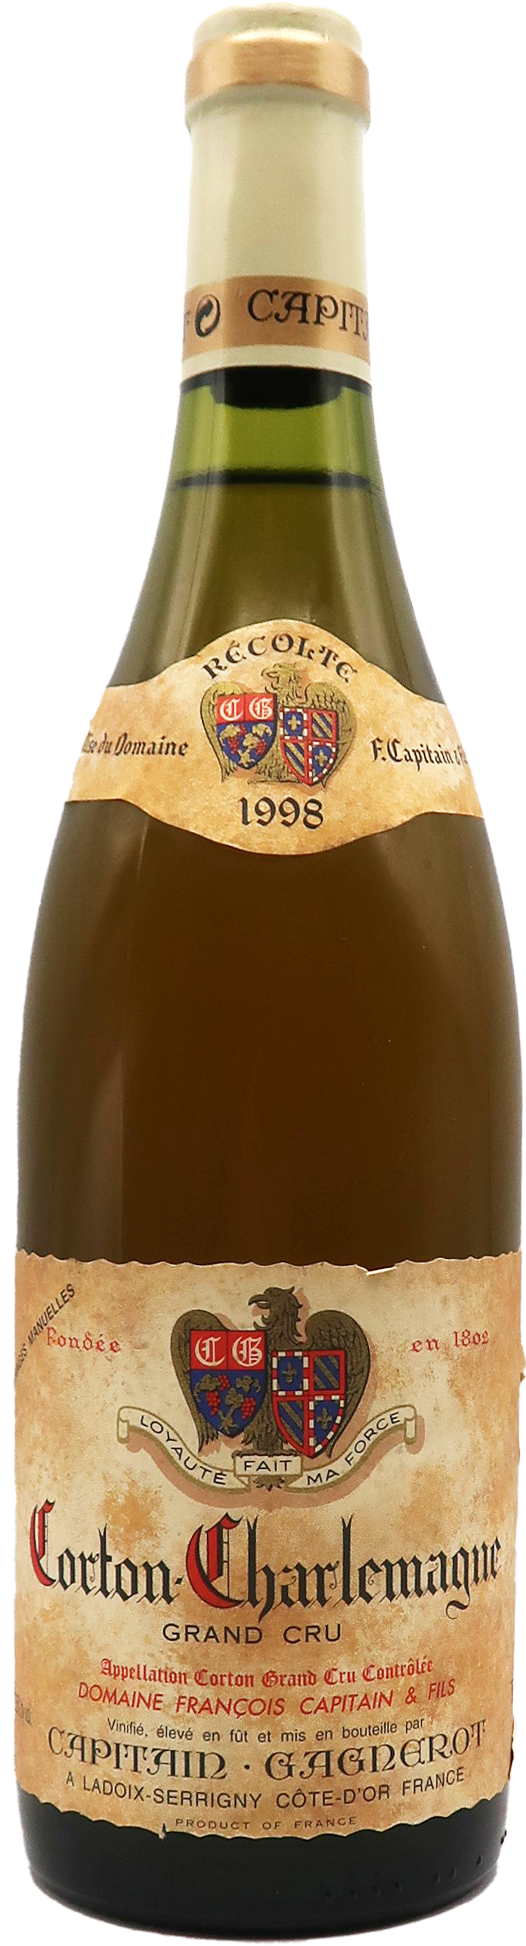 Corton-Charlemagne 1998 Domaine Capitain Gagnerot